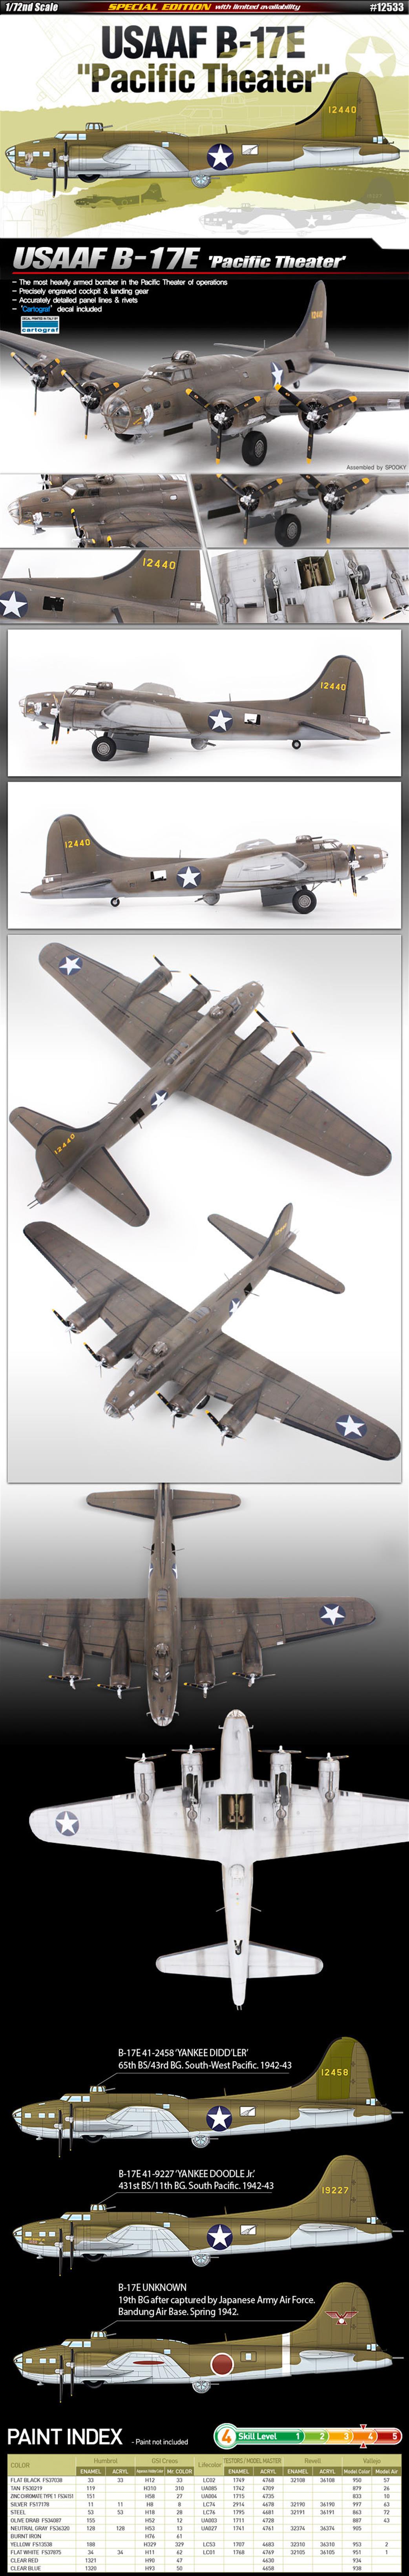 Academy 1/72 12533 USAAF B-17E WW2 American Pacific Theater Bomber Kit